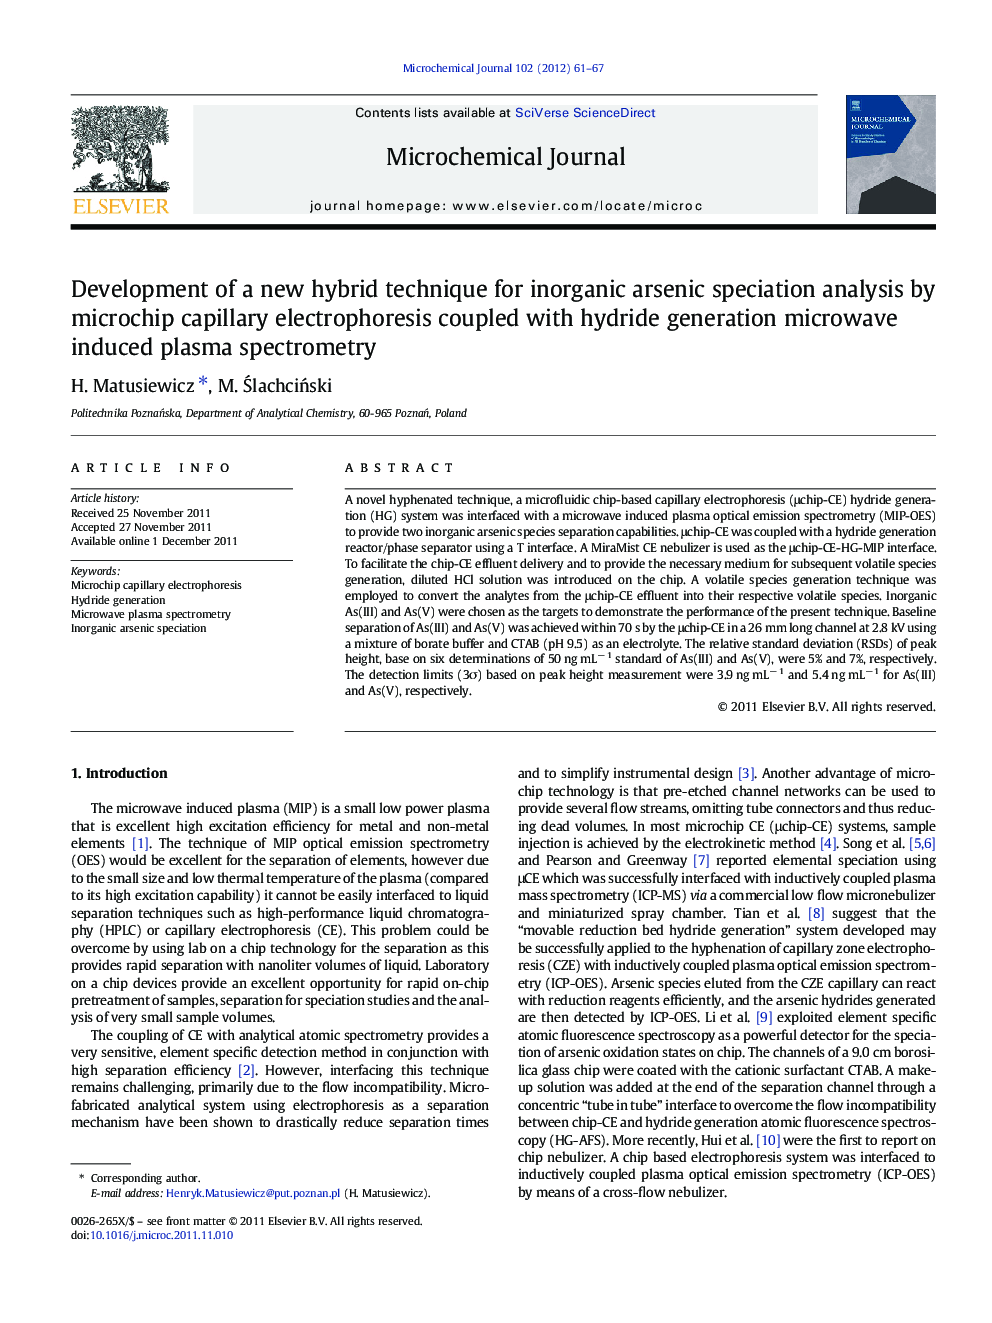 Development of a new hybrid technique for inorganic arsenic speciation analysis by microchip capillary electrophoresis coupled with hydride generation microwave induced plasma spectrometry